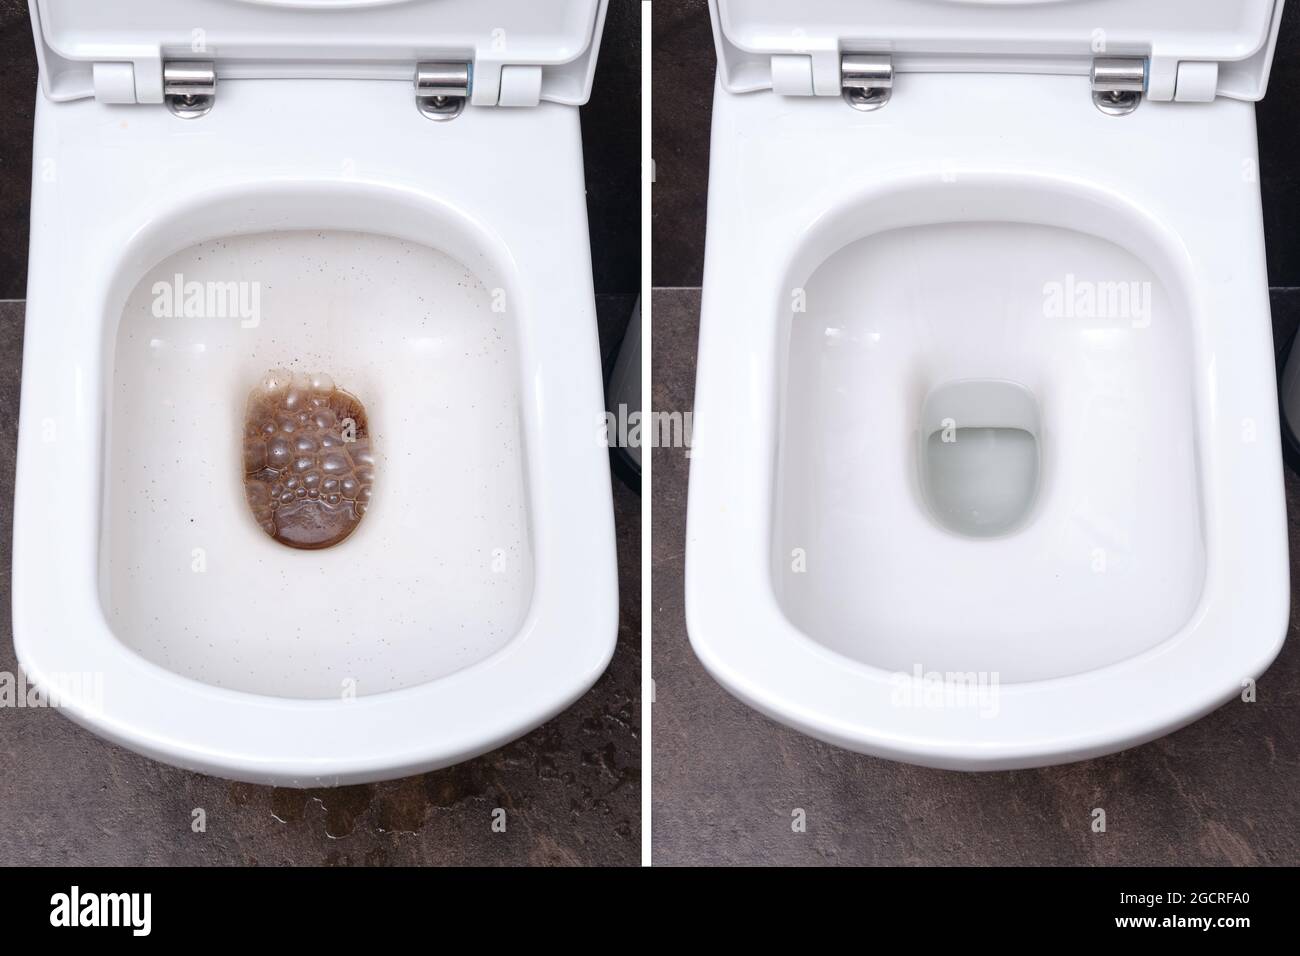 Toilet in the bathroom before and after cleaning the blockage, dirty and clean toilet bowl Stock Photo